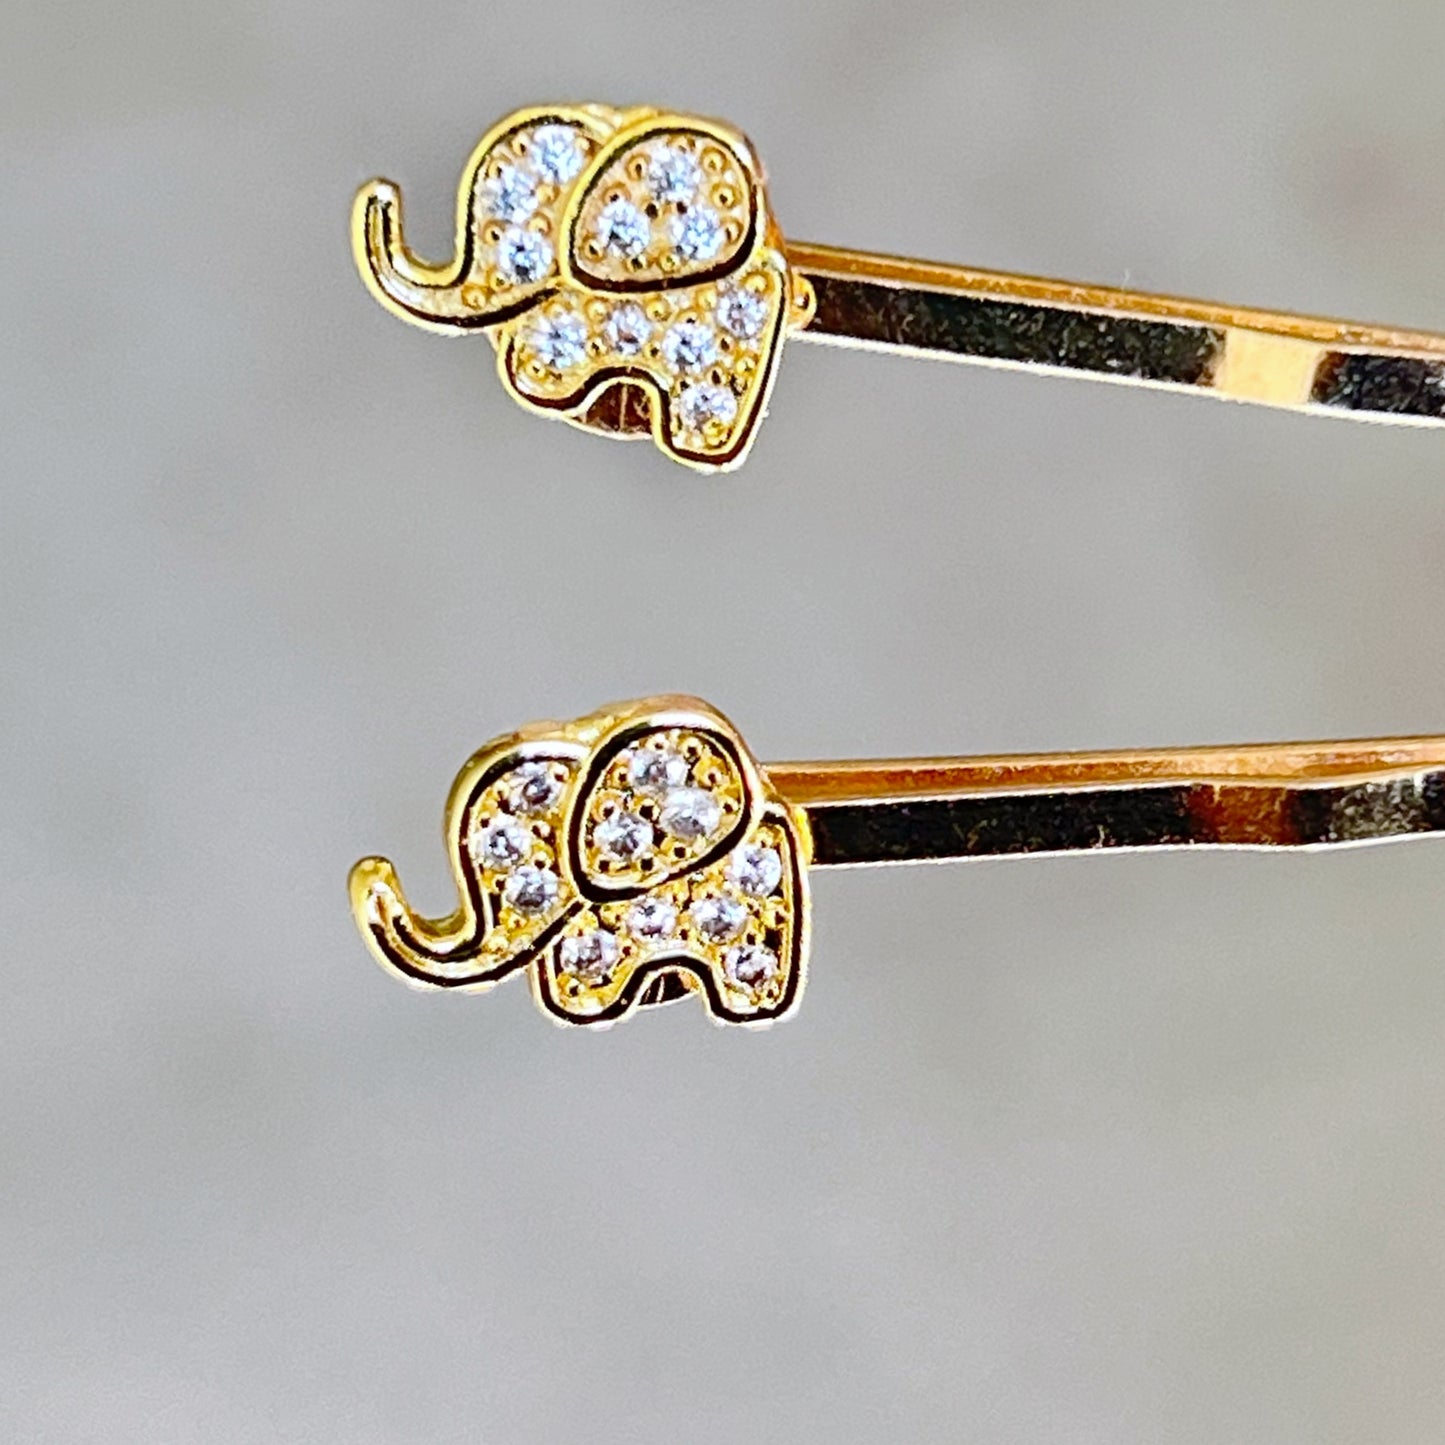 Tiny Gold Rhinestone Elephant Bobby Pins: Adorable Animal-inspired Accessories